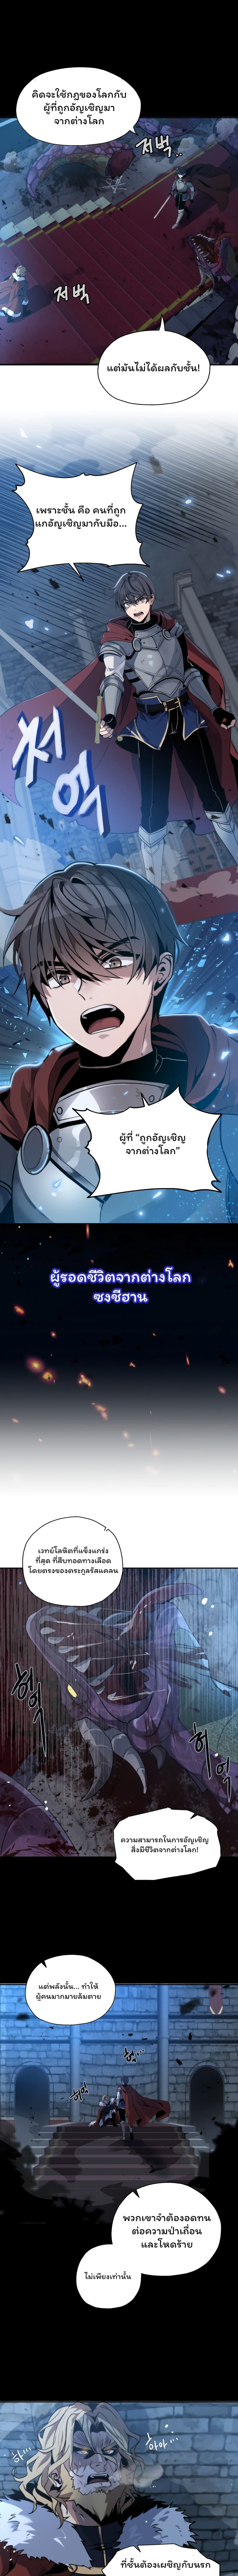 Re entering Another World ตอนที่ 1 04